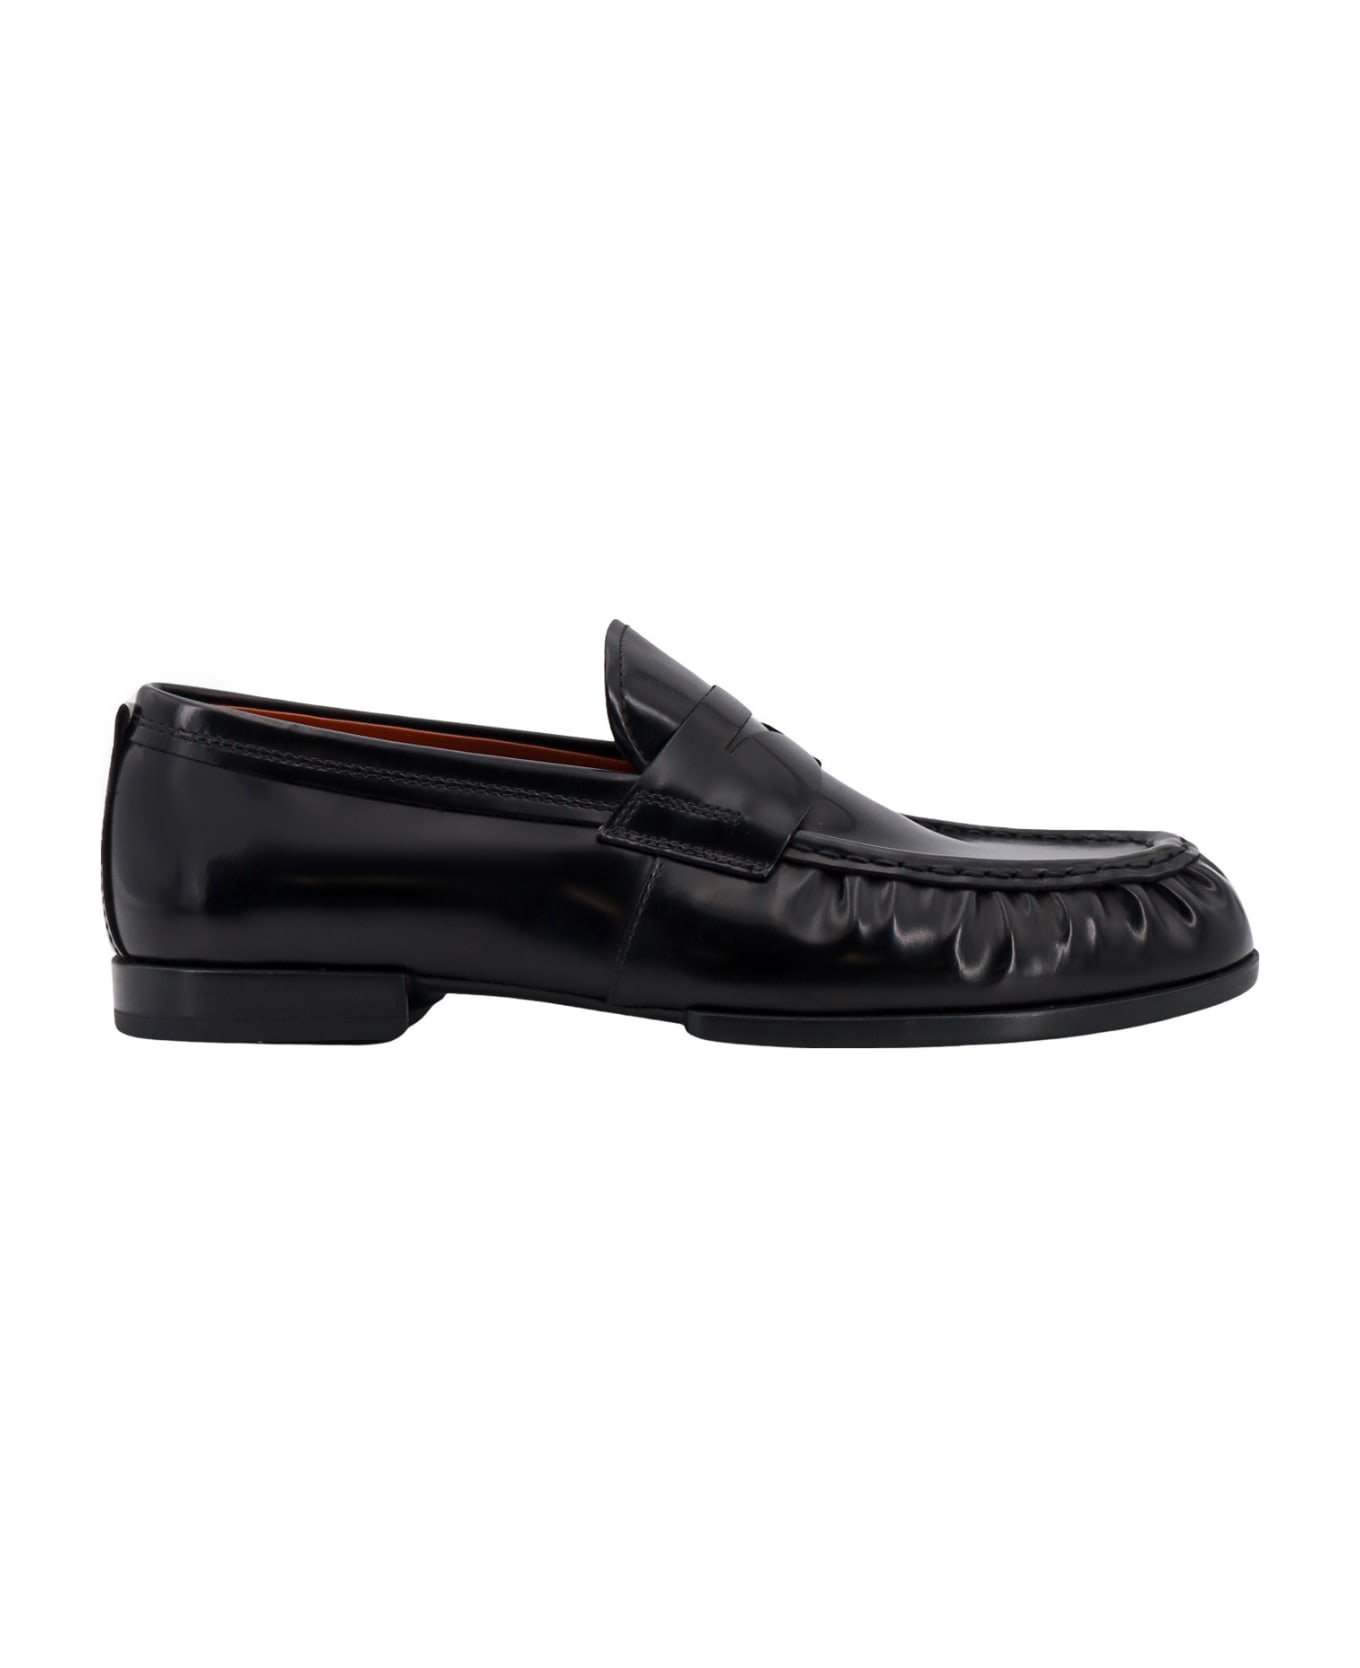 Tod's Loafer Almond Toe Slip-on Loafers - Black ローファー＆デッキシューズ